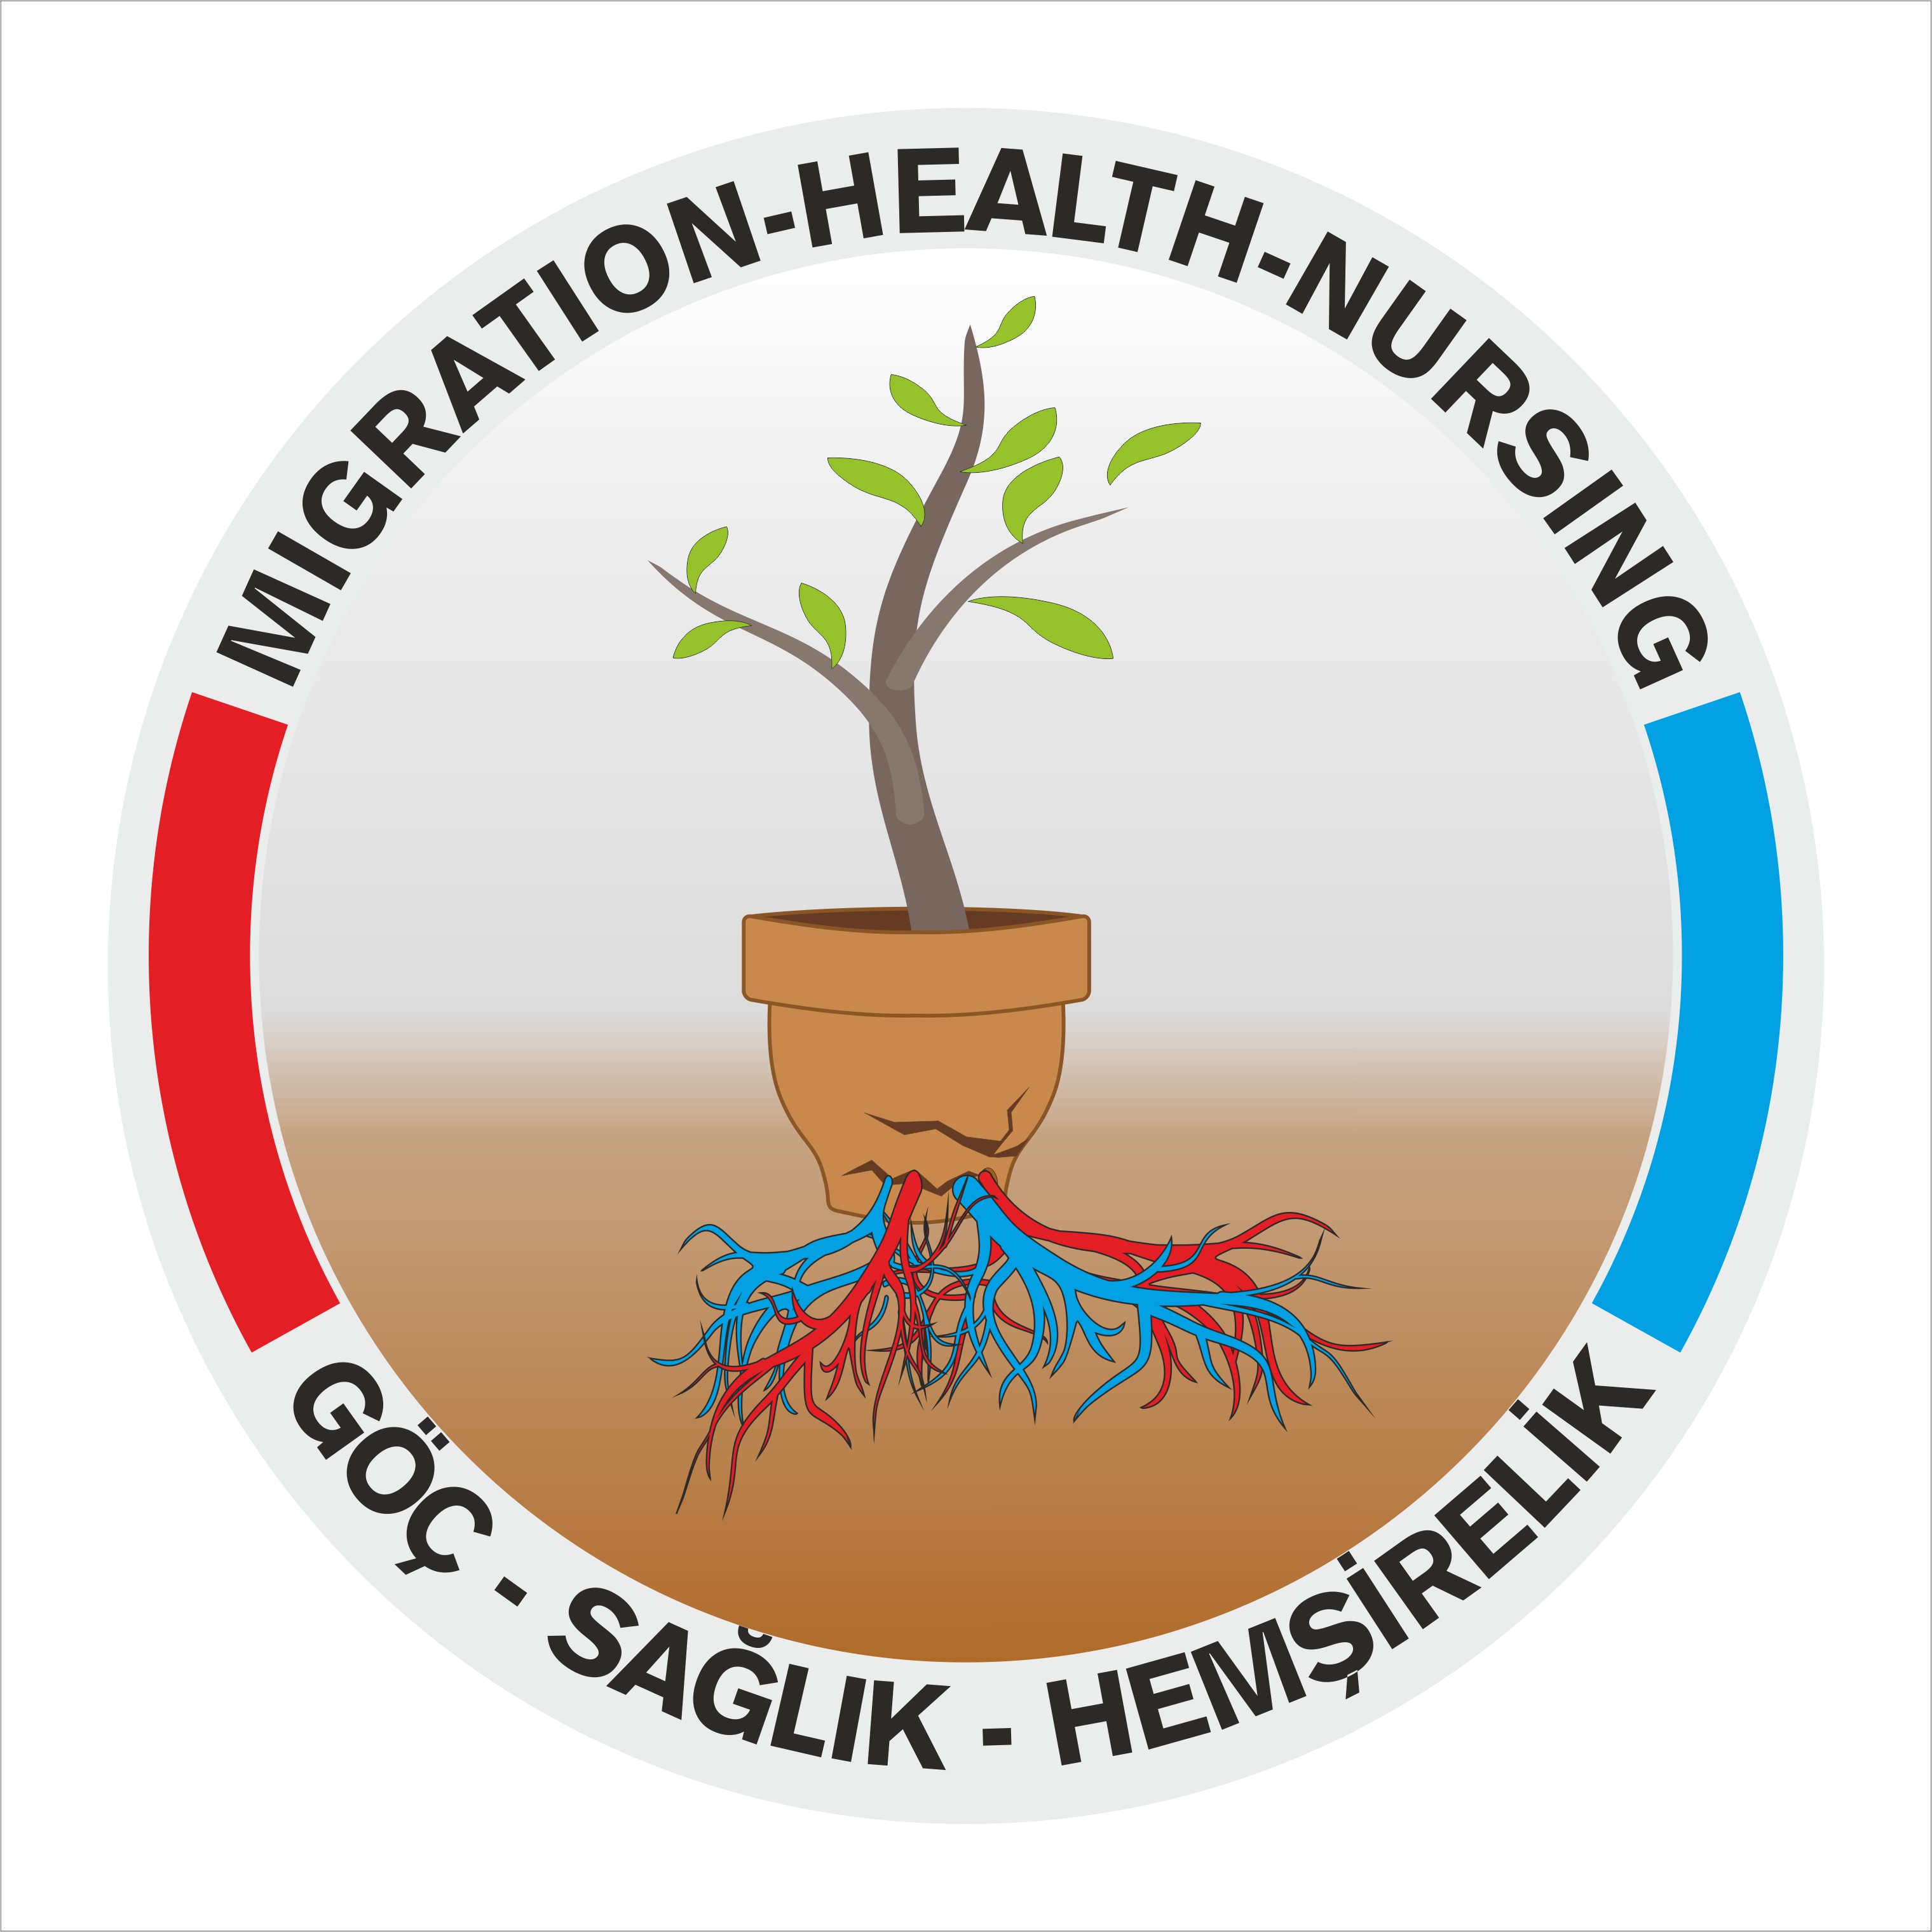 School of Nursing Students' Local Organizing Committee at Maltepe University is pleased to announce the call for papers for the undergraduate students' conference on MIGRATION-HEALTH-NURSING  to be held at Maltepe University on 17-18 March 2016.